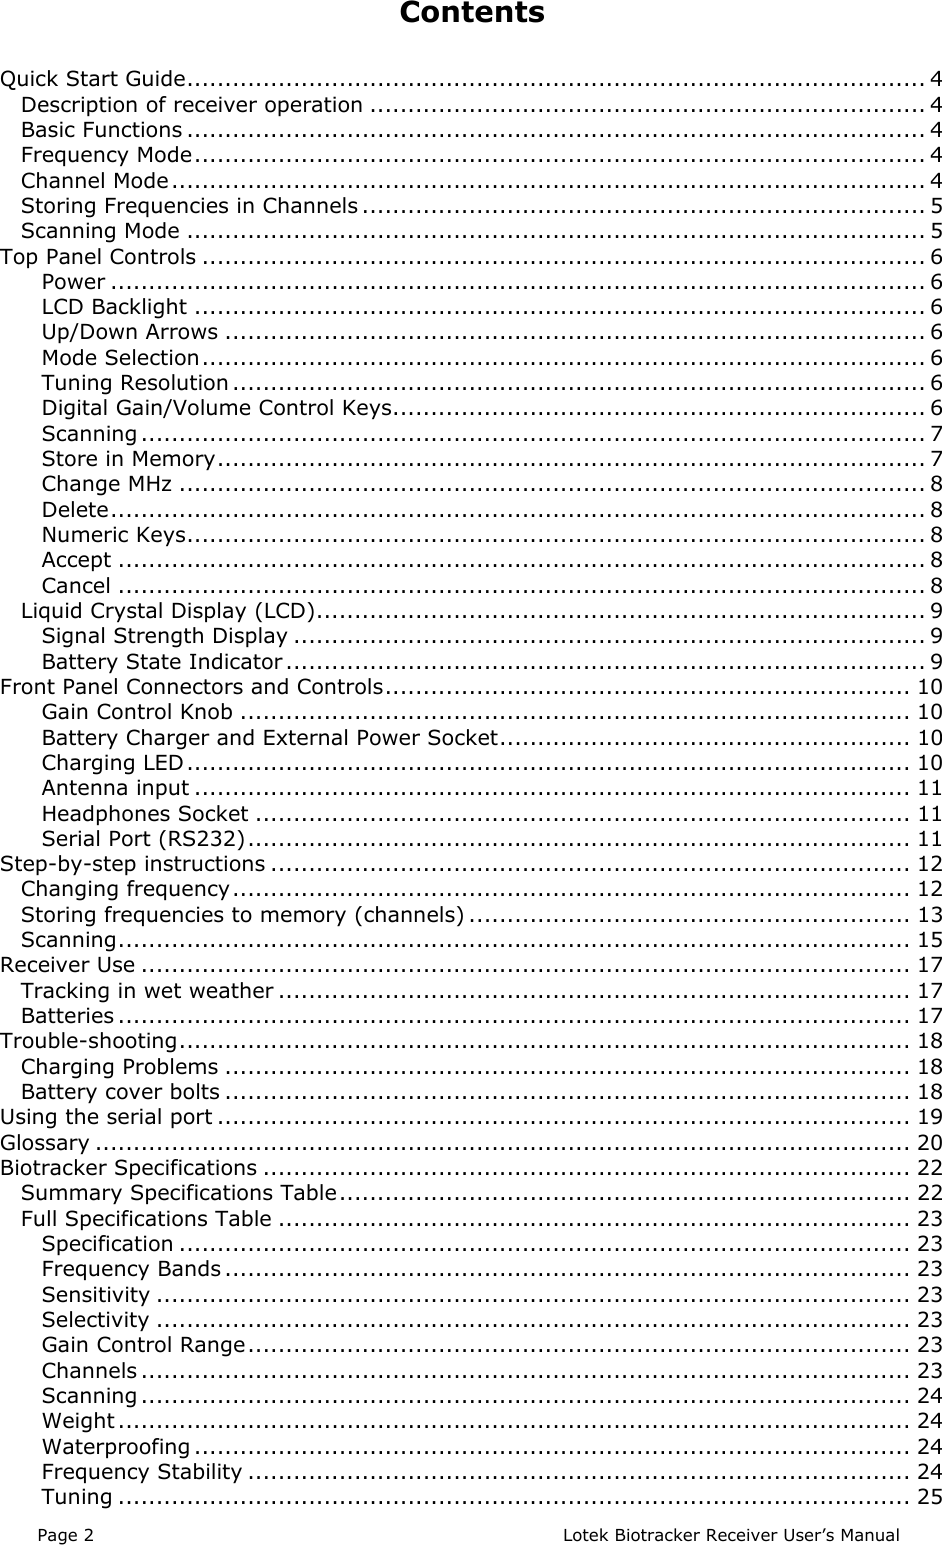 Page 2  Lotek Biotracker Receiver User’s ManualContentsQuick Start Guide................................................................................................. 4Description of receiver operation ......................................................................... 4Basic Functions ................................................................................................. 4Frequency Mode................................................................................................ 4Channel Mode................................................................................................... 4Storing Frequencies in Channels .......................................................................... 5Scanning Mode ................................................................................................. 5Top Panel Controls ............................................................................................... 6Power ........................................................................................................... 6LCD Backlight ................................................................................................ 6Up/Down Arrows ............................................................................................ 6Mode Selection............................................................................................... 6Tuning Resolution ........................................................................................... 6Digital Gain/Volume Control Keys...................................................................... 6Scanning ....................................................................................................... 7Store in Memory............................................................................................. 7Change MHz .................................................................................................. 8Delete........................................................................................................... 8Numeric Keys................................................................................................. 8Accept .......................................................................................................... 8Cancel .......................................................................................................... 8Liquid Crystal Display (LCD)................................................................................ 9Signal Strength Display ................................................................................... 9Battery State Indicator.................................................................................... 9Front Panel Connectors and Controls..................................................................... 10Gain Control Knob ........................................................................................ 10Battery Charger and External Power Socket...................................................... 10Charging LED............................................................................................... 10Antenna input .............................................................................................. 11Headphones Socket ...................................................................................... 11Serial Port (RS232)....................................................................................... 11Step-by-step instructions .................................................................................... 12Changing frequency......................................................................................... 12Storing frequencies to memory (channels) .......................................................... 13Scanning........................................................................................................ 15Receiver Use ..................................................................................................... 17Tracking in wet weather ................................................................................... 17Batteries ........................................................................................................ 17Trouble-shooting................................................................................................ 18Charging Problems .......................................................................................... 18Battery cover bolts .......................................................................................... 18Using the serial port ........................................................................................... 19Glossary ........................................................................................................... 20Biotracker Specifications ..................................................................................... 22Summary Specifications Table........................................................................... 22Full Specifications Table ................................................................................... 23Specification ................................................................................................ 23Frequency Bands .......................................................................................... 23Sensitivity ................................................................................................... 23Selectivity ................................................................................................... 23Gain Control Range....................................................................................... 23Channels ..................................................................................................... 23Scanning ..................................................................................................... 24Weight ........................................................................................................ 24Waterproofing .............................................................................................. 24Frequency Stability ....................................................................................... 24Tuning ........................................................................................................ 25